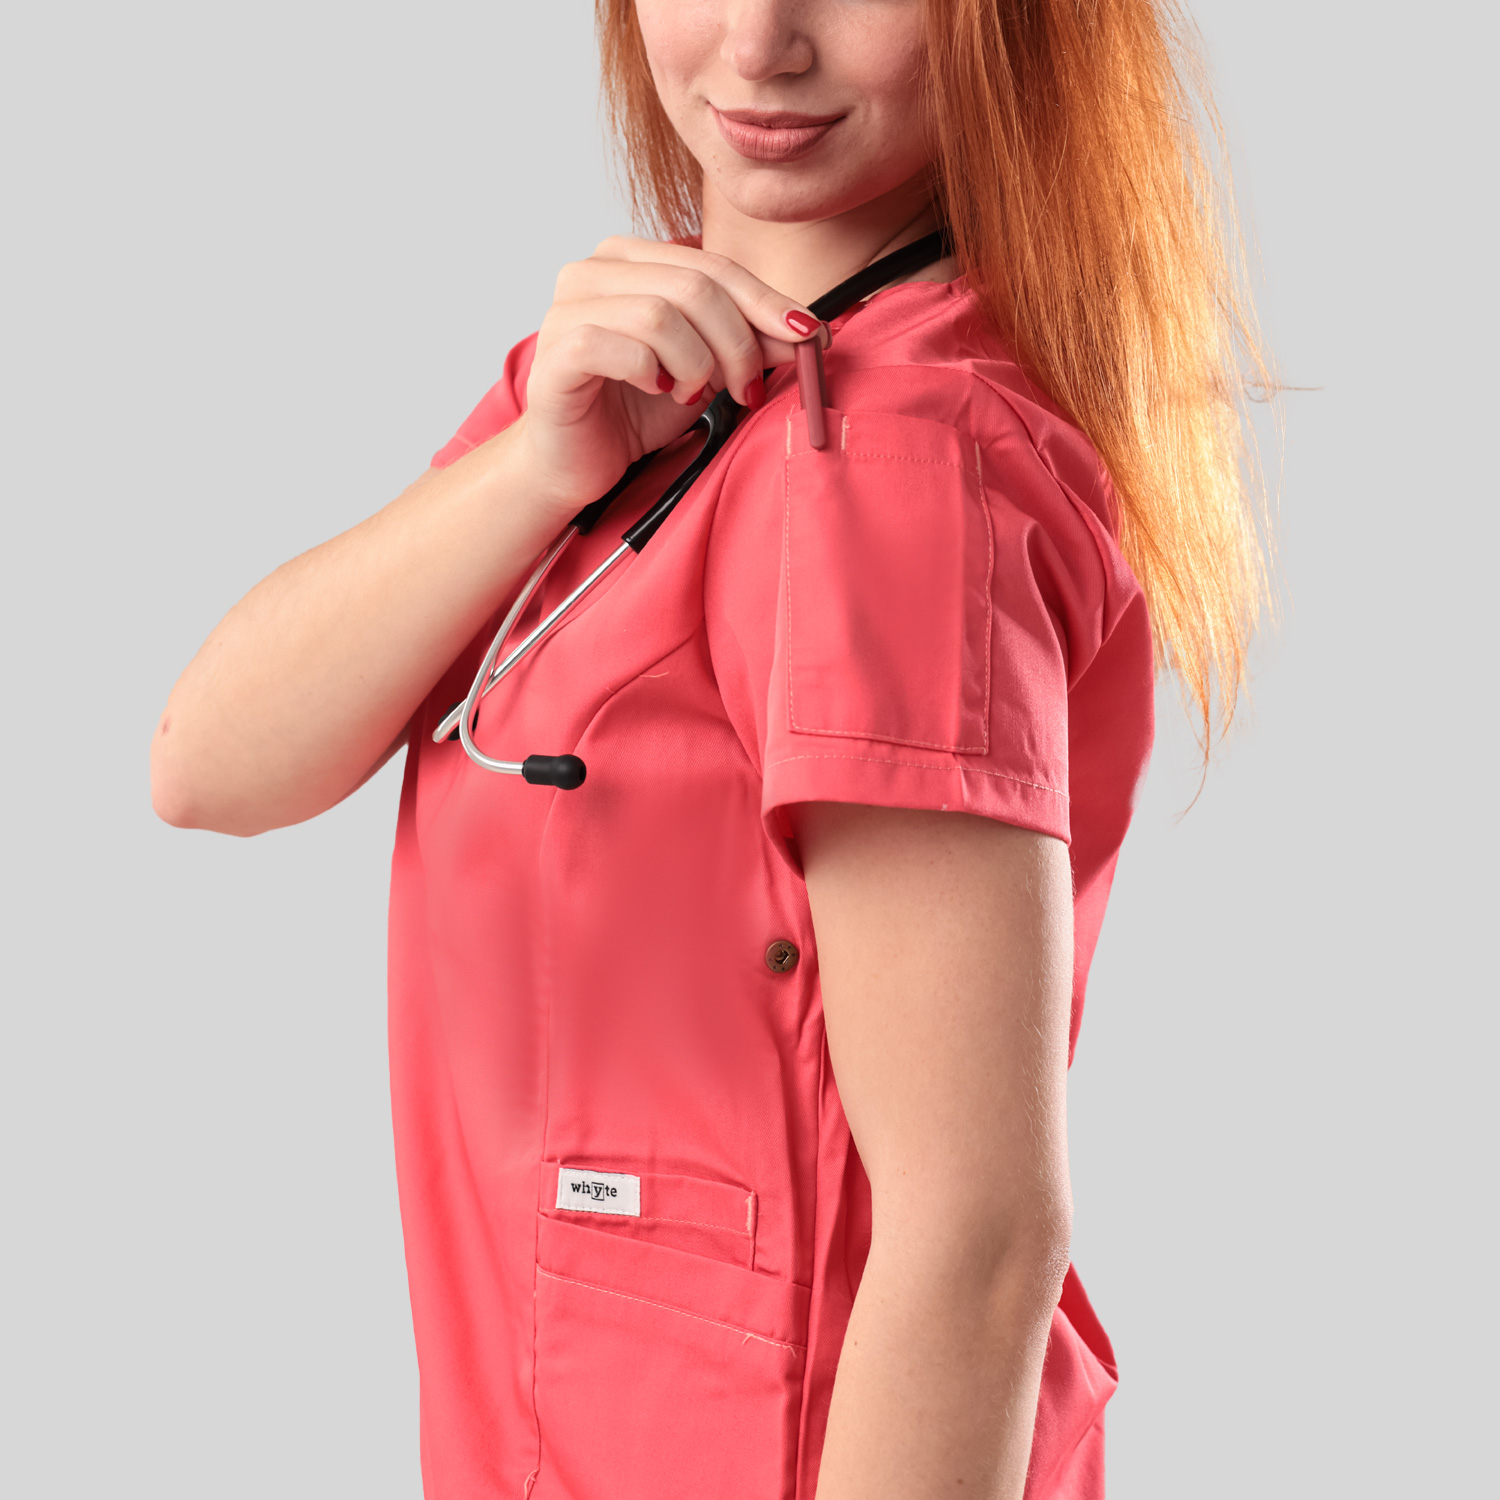 classic edition-2.0 - corail-top- 5 pockets